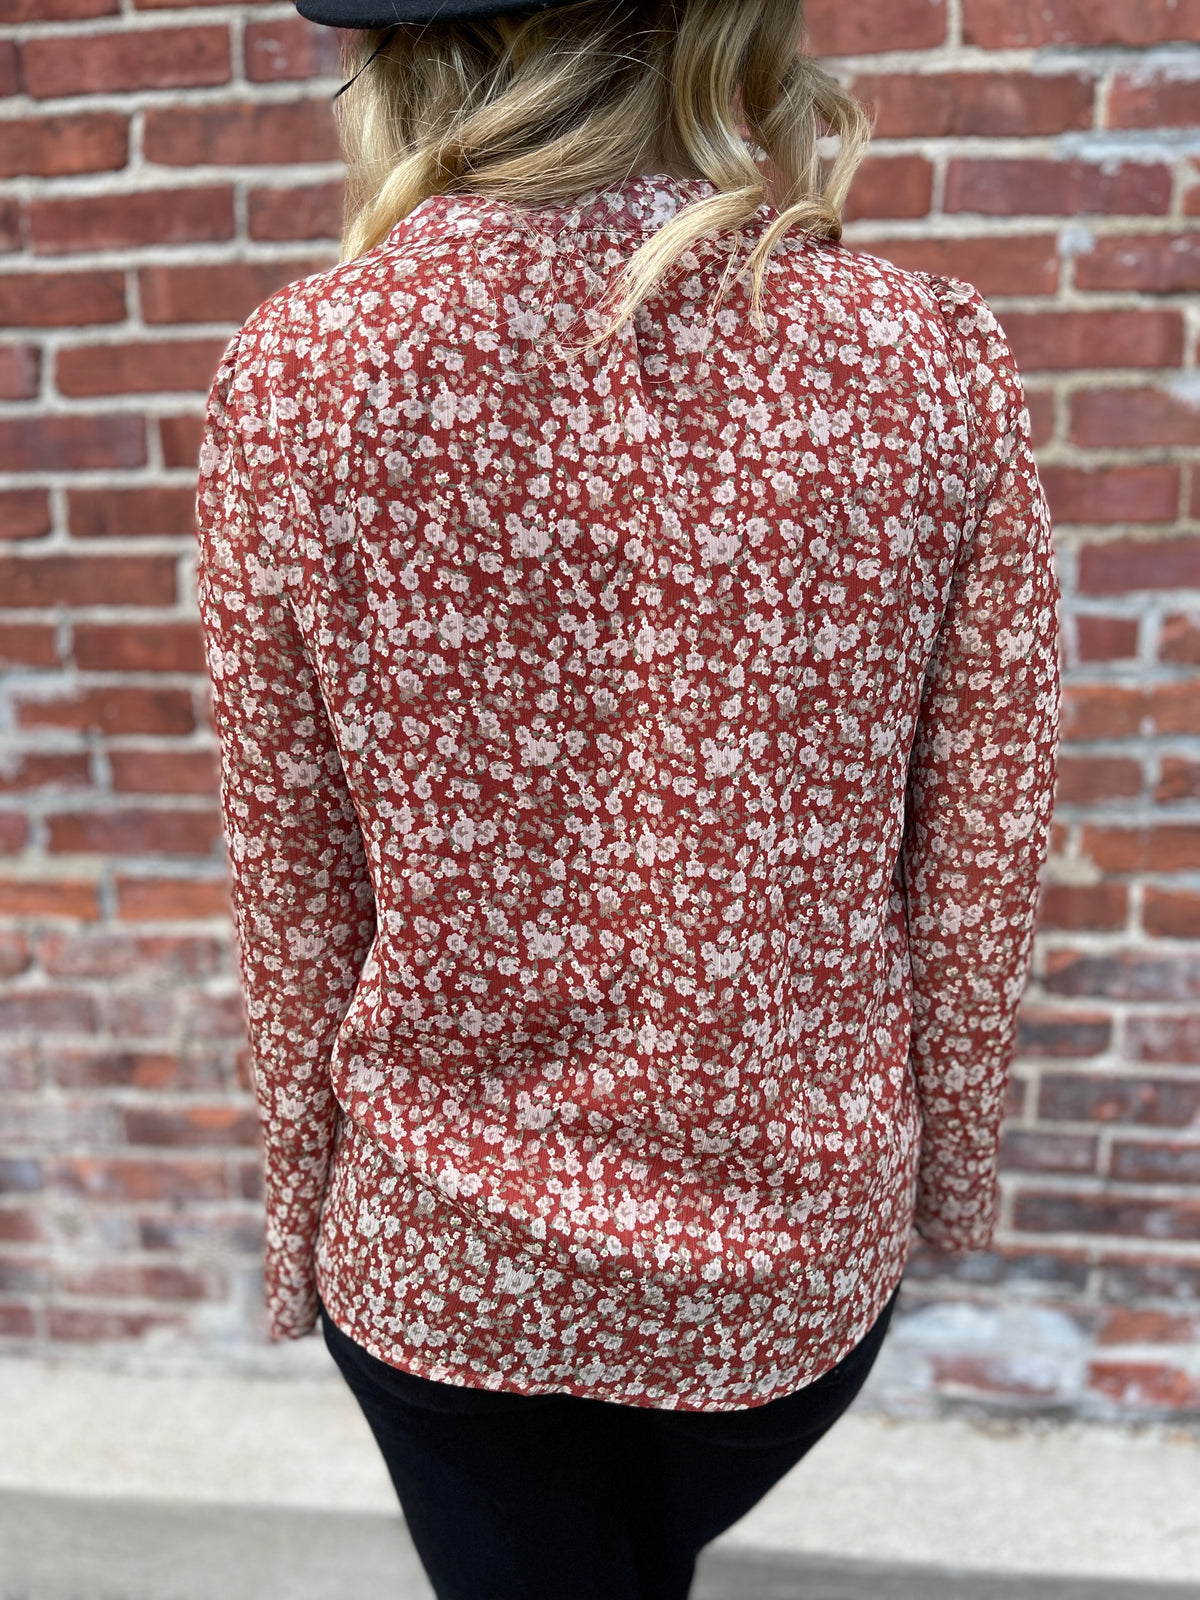 RUST FLORAL CHIFFON DITSY FLORAL BLOUSE